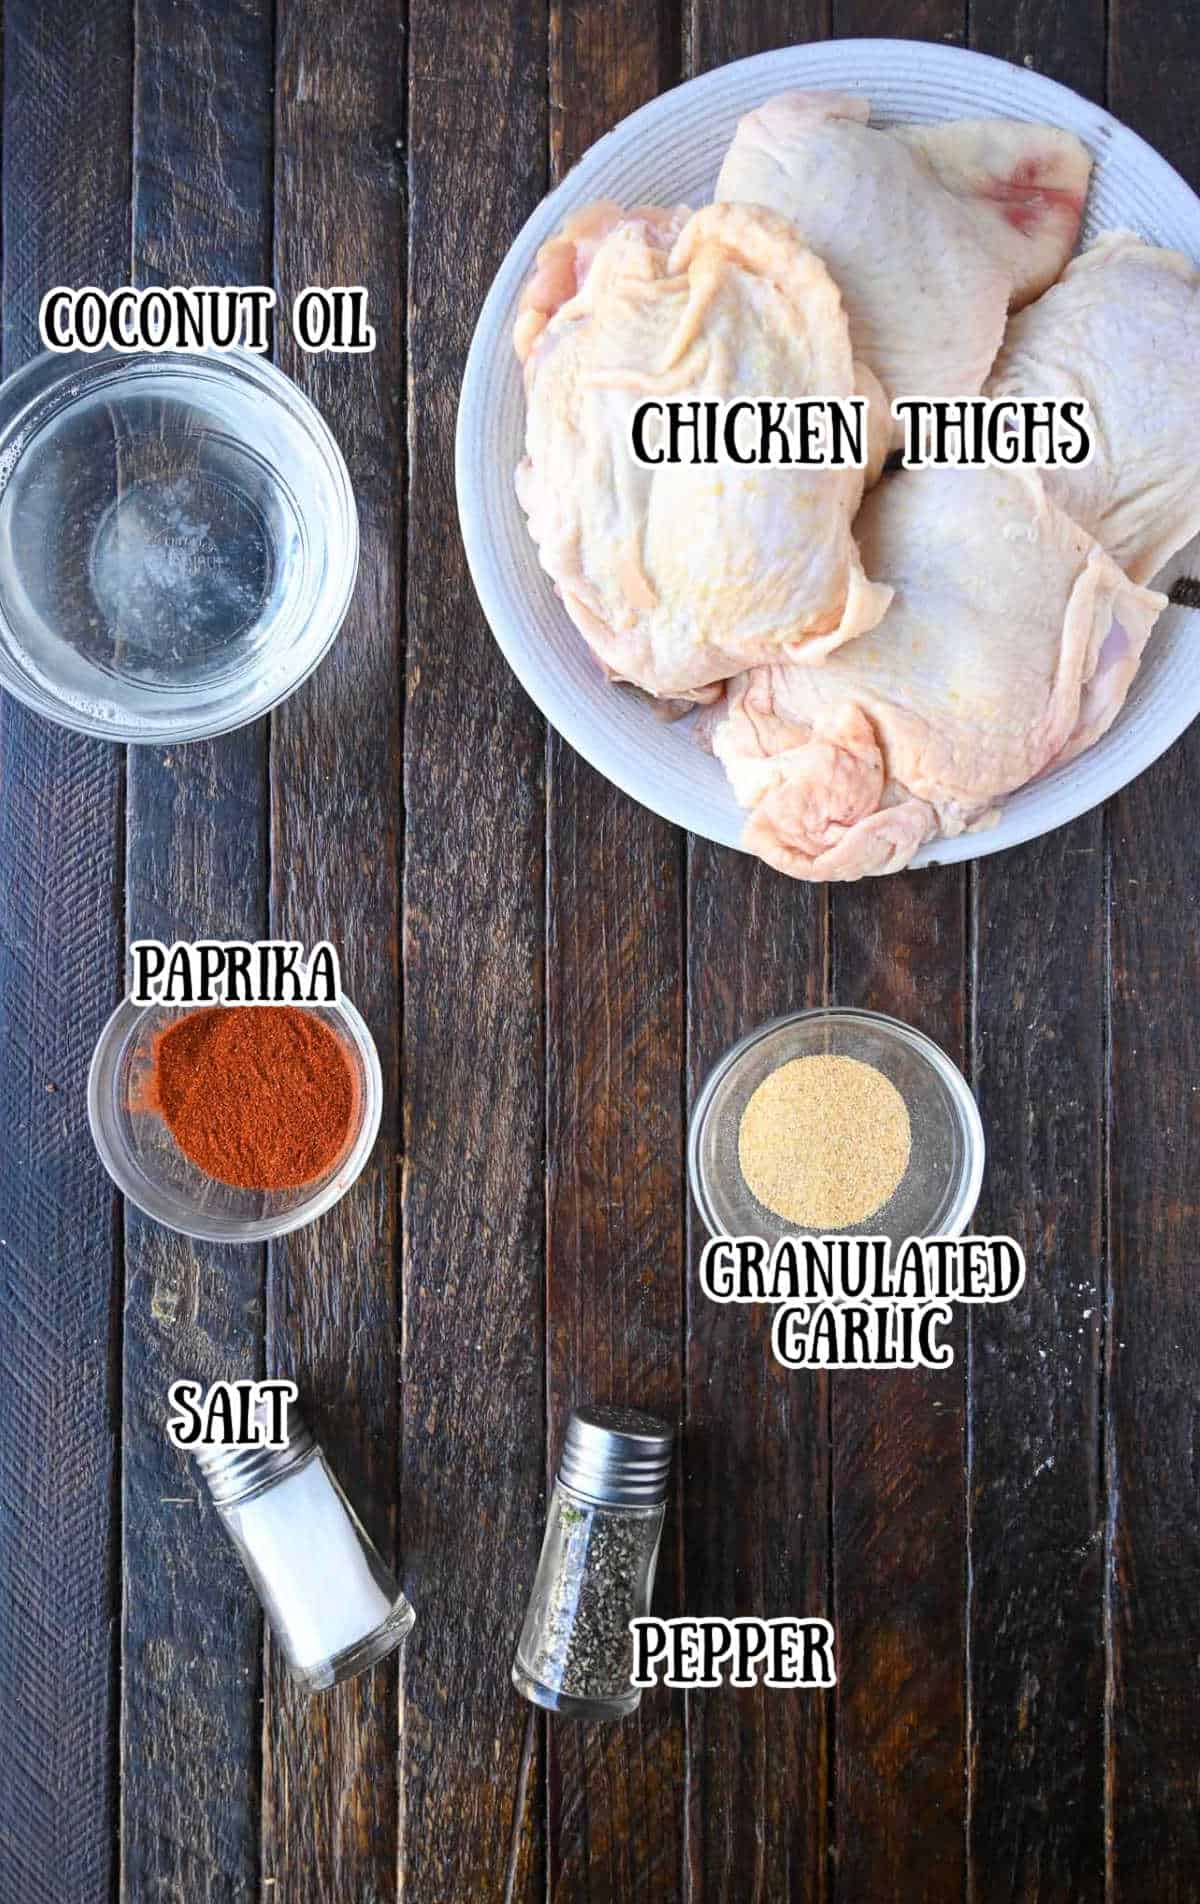 All the ingredients needed for the chicken recipe.